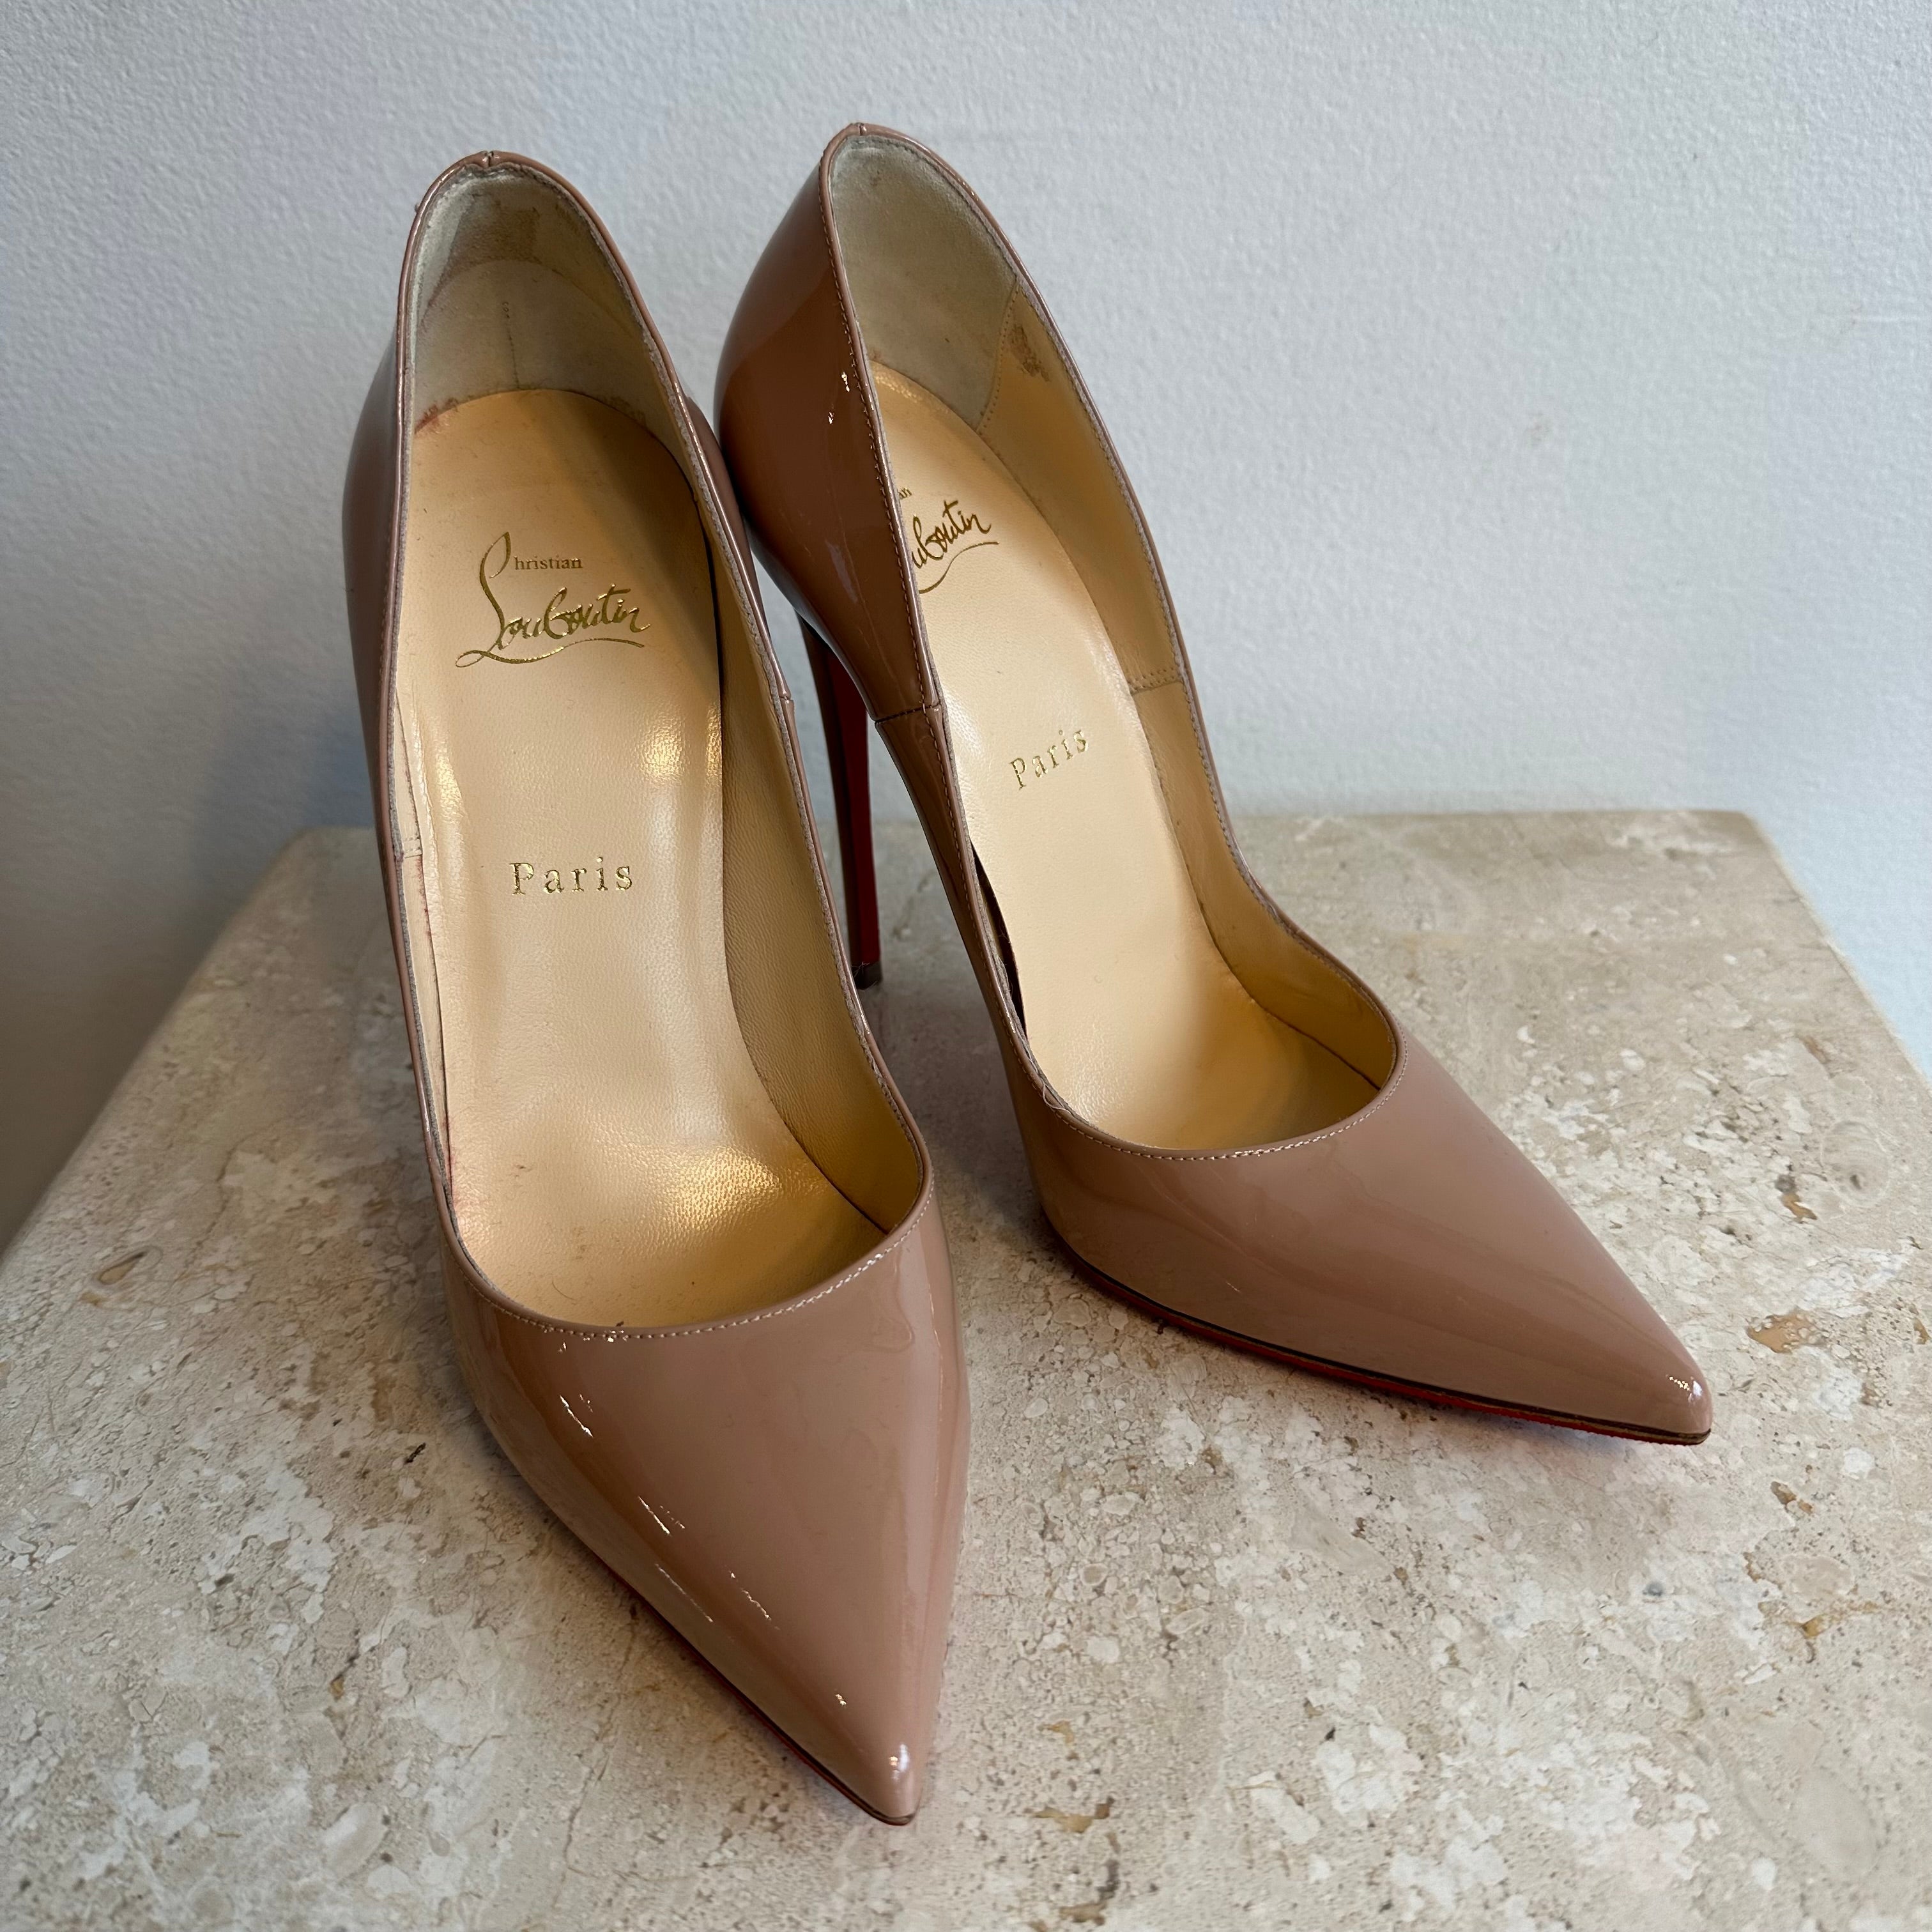 Christian Louboutin Nude So Kate Pumps in Natural